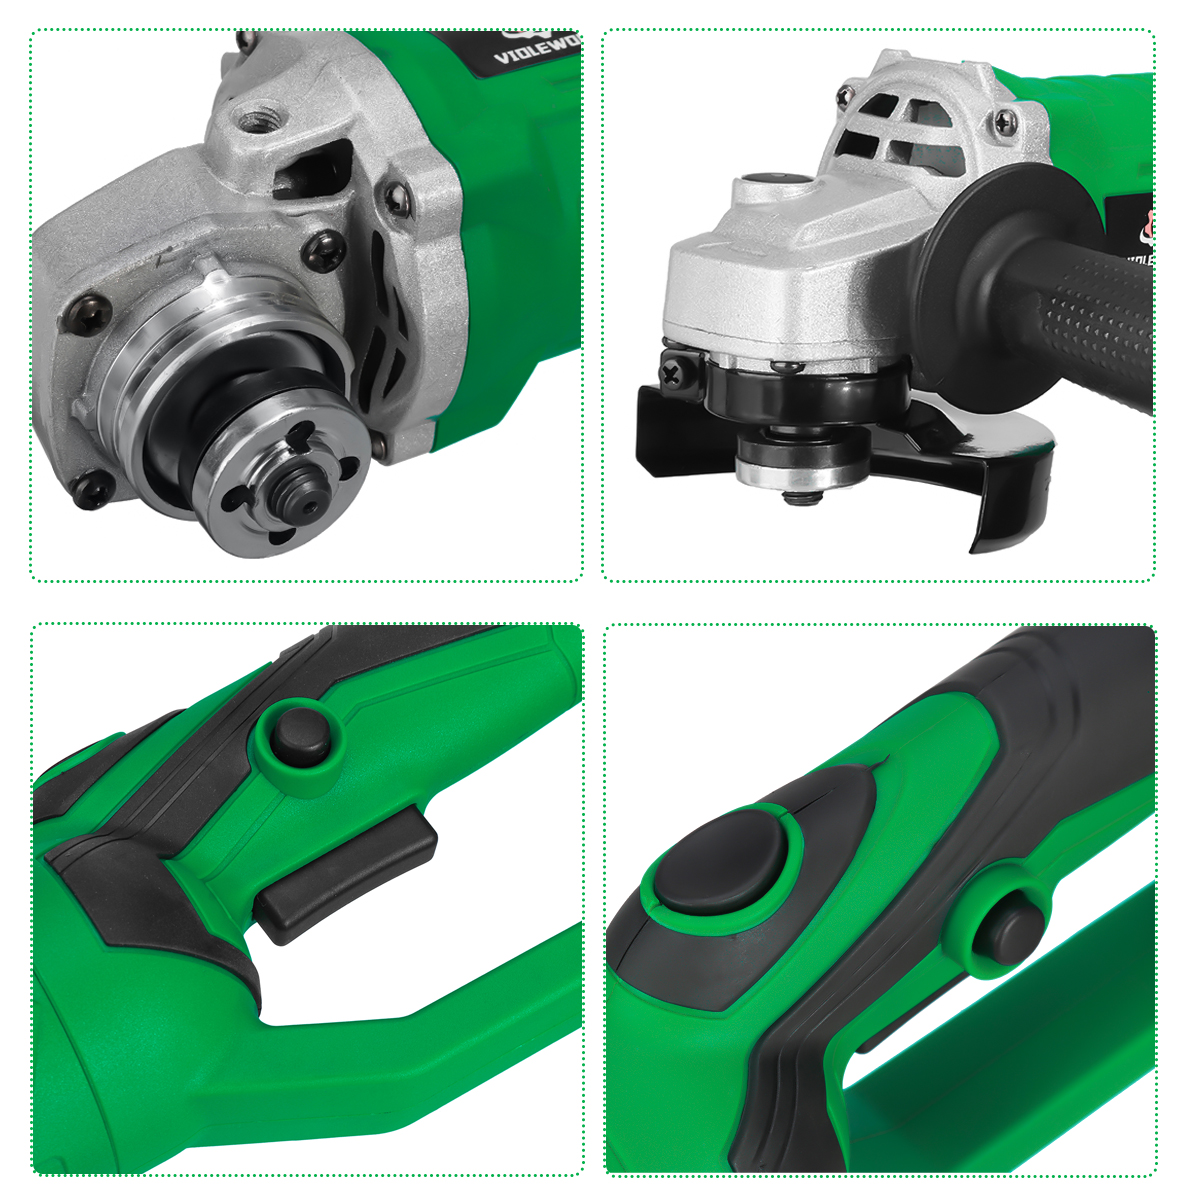 688VF-1200W-100mm-Brushless-Electric-Angle-Grinder-180deg-Rotation-3-Gears-Cutting-Grinding-Tool-Ind-1859330-11